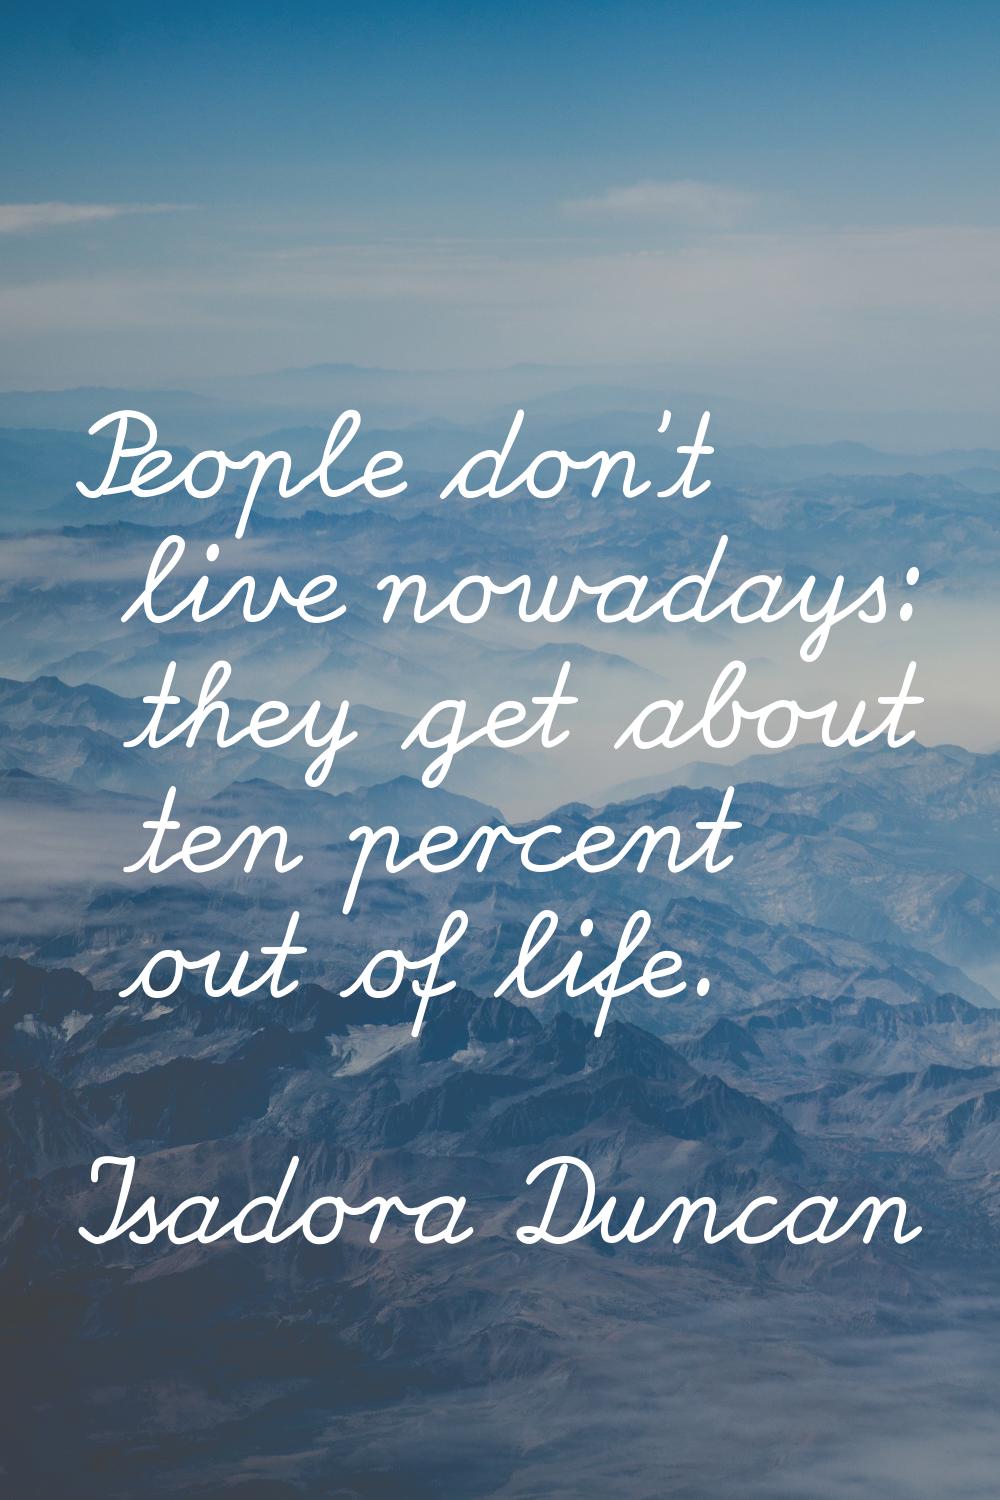 People don't live nowadays: they get about ten percent out of life.